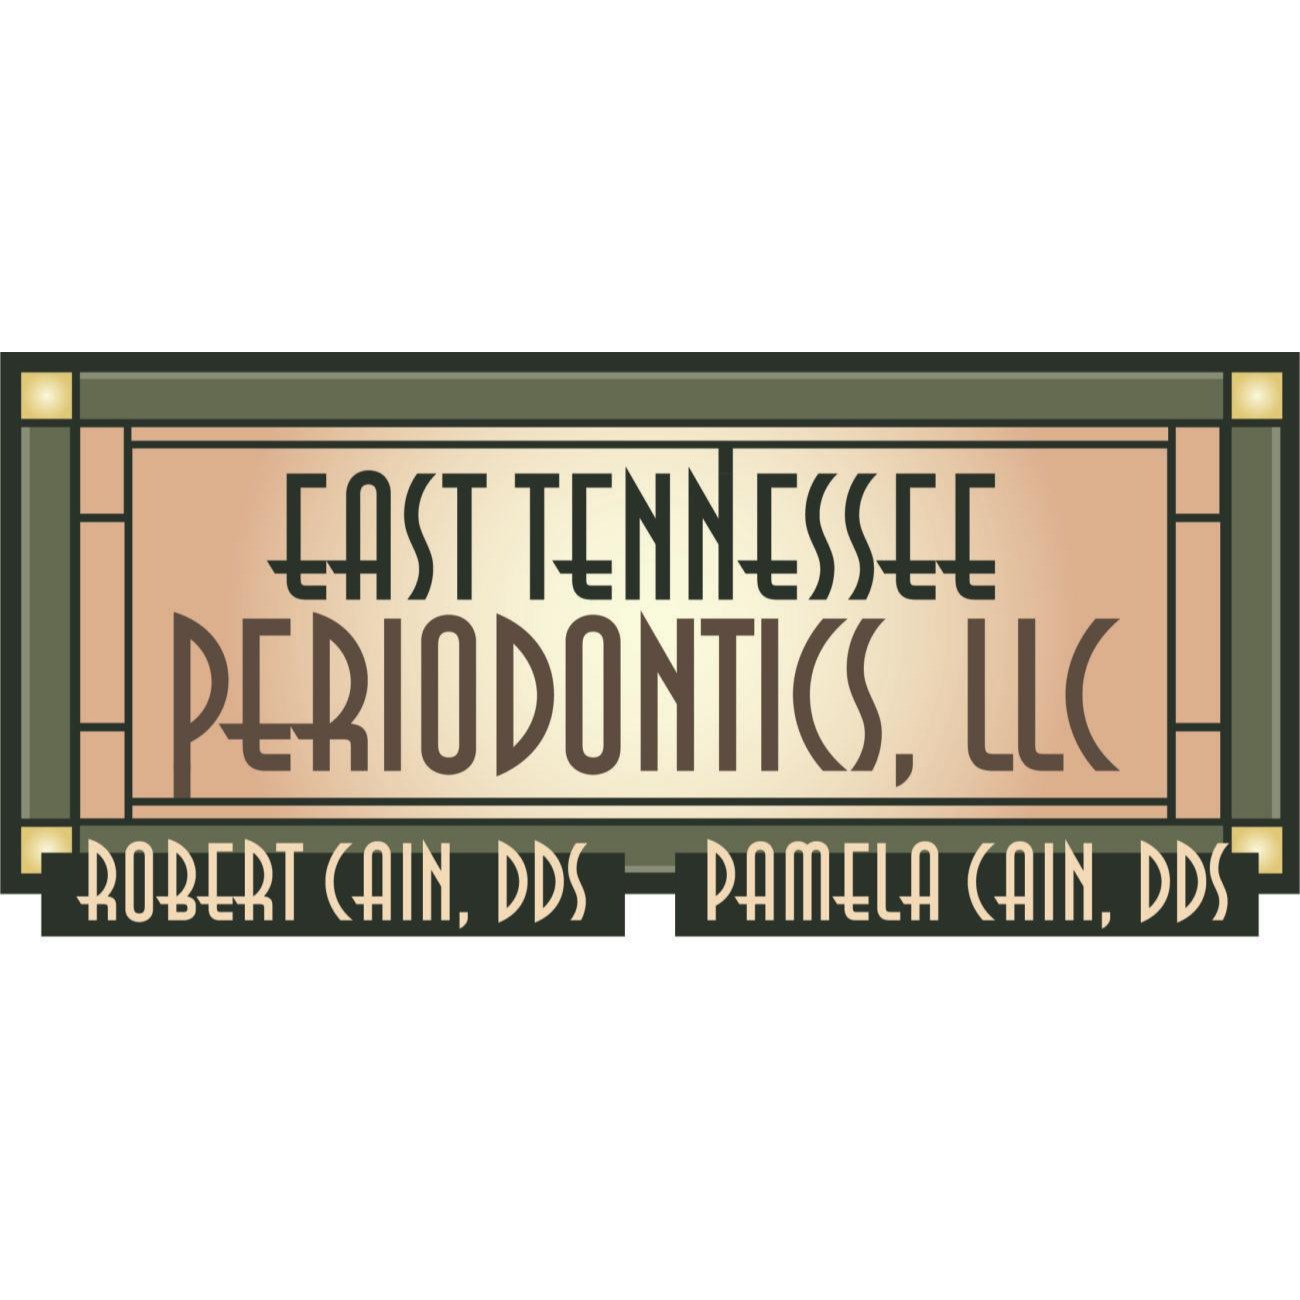 East Tennessee Periodontics LLC: Pamela Cain, DDS - Knoxville, TN 37932 - (865)246-0460 | ShowMeLocal.com